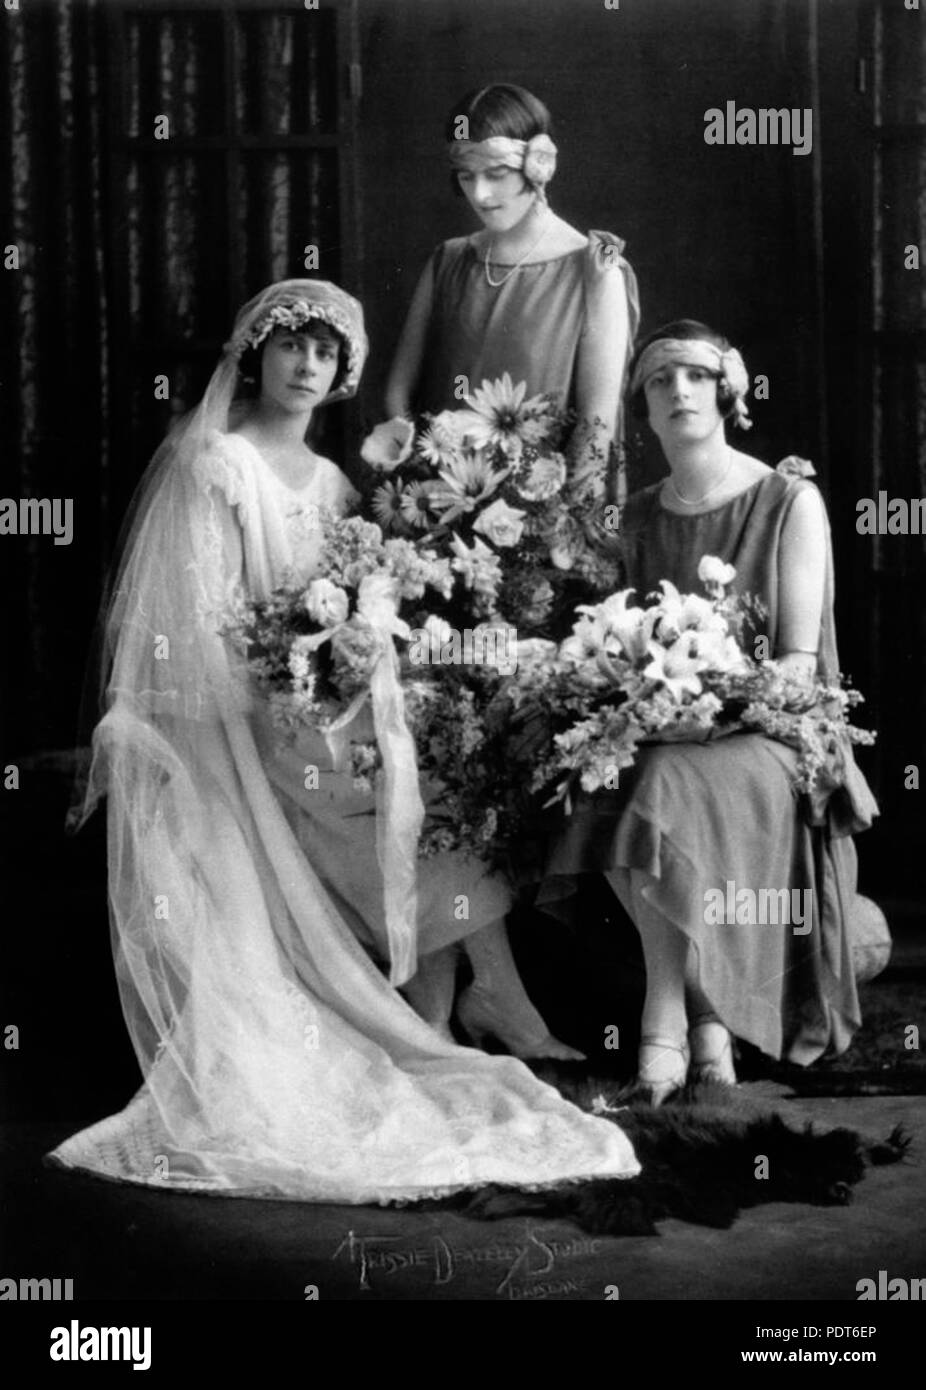 228 StateLibQld 1 146535 Agnes, Nea and Glad pose for wedding photographs, October 1925 Stock Photo